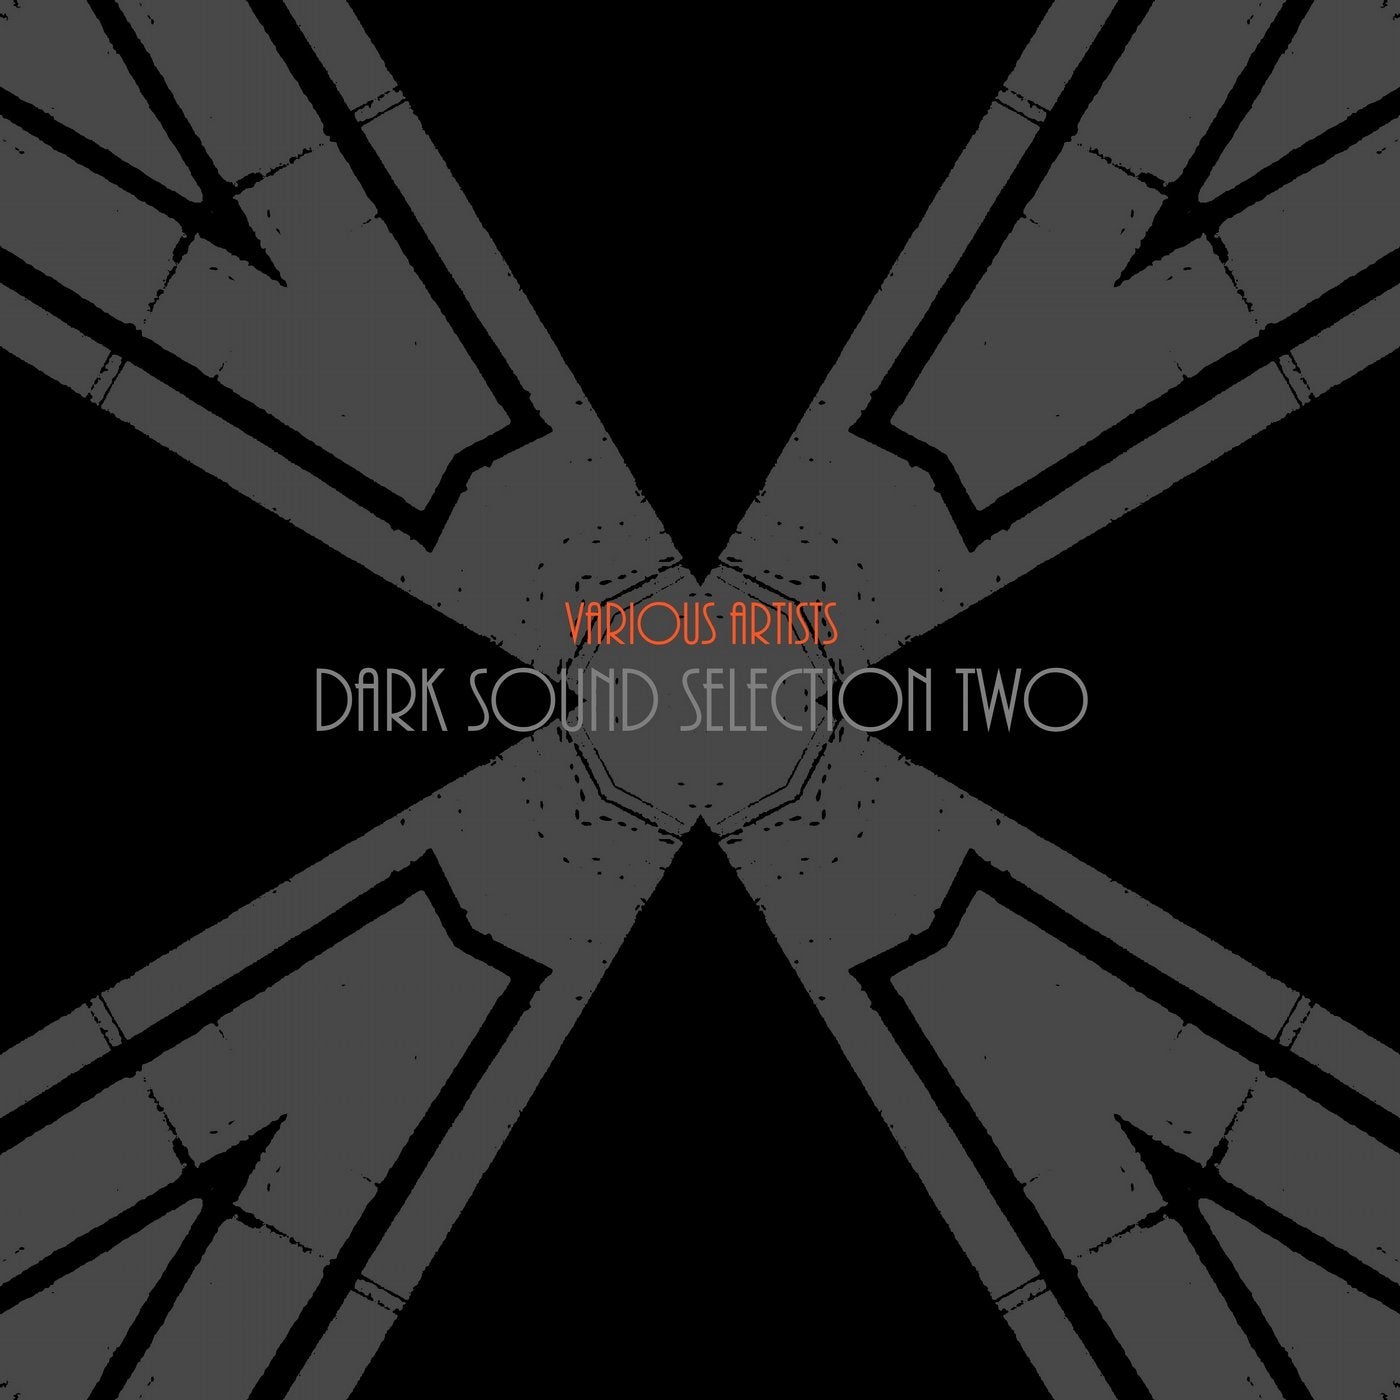 Dark Sound Selection Two